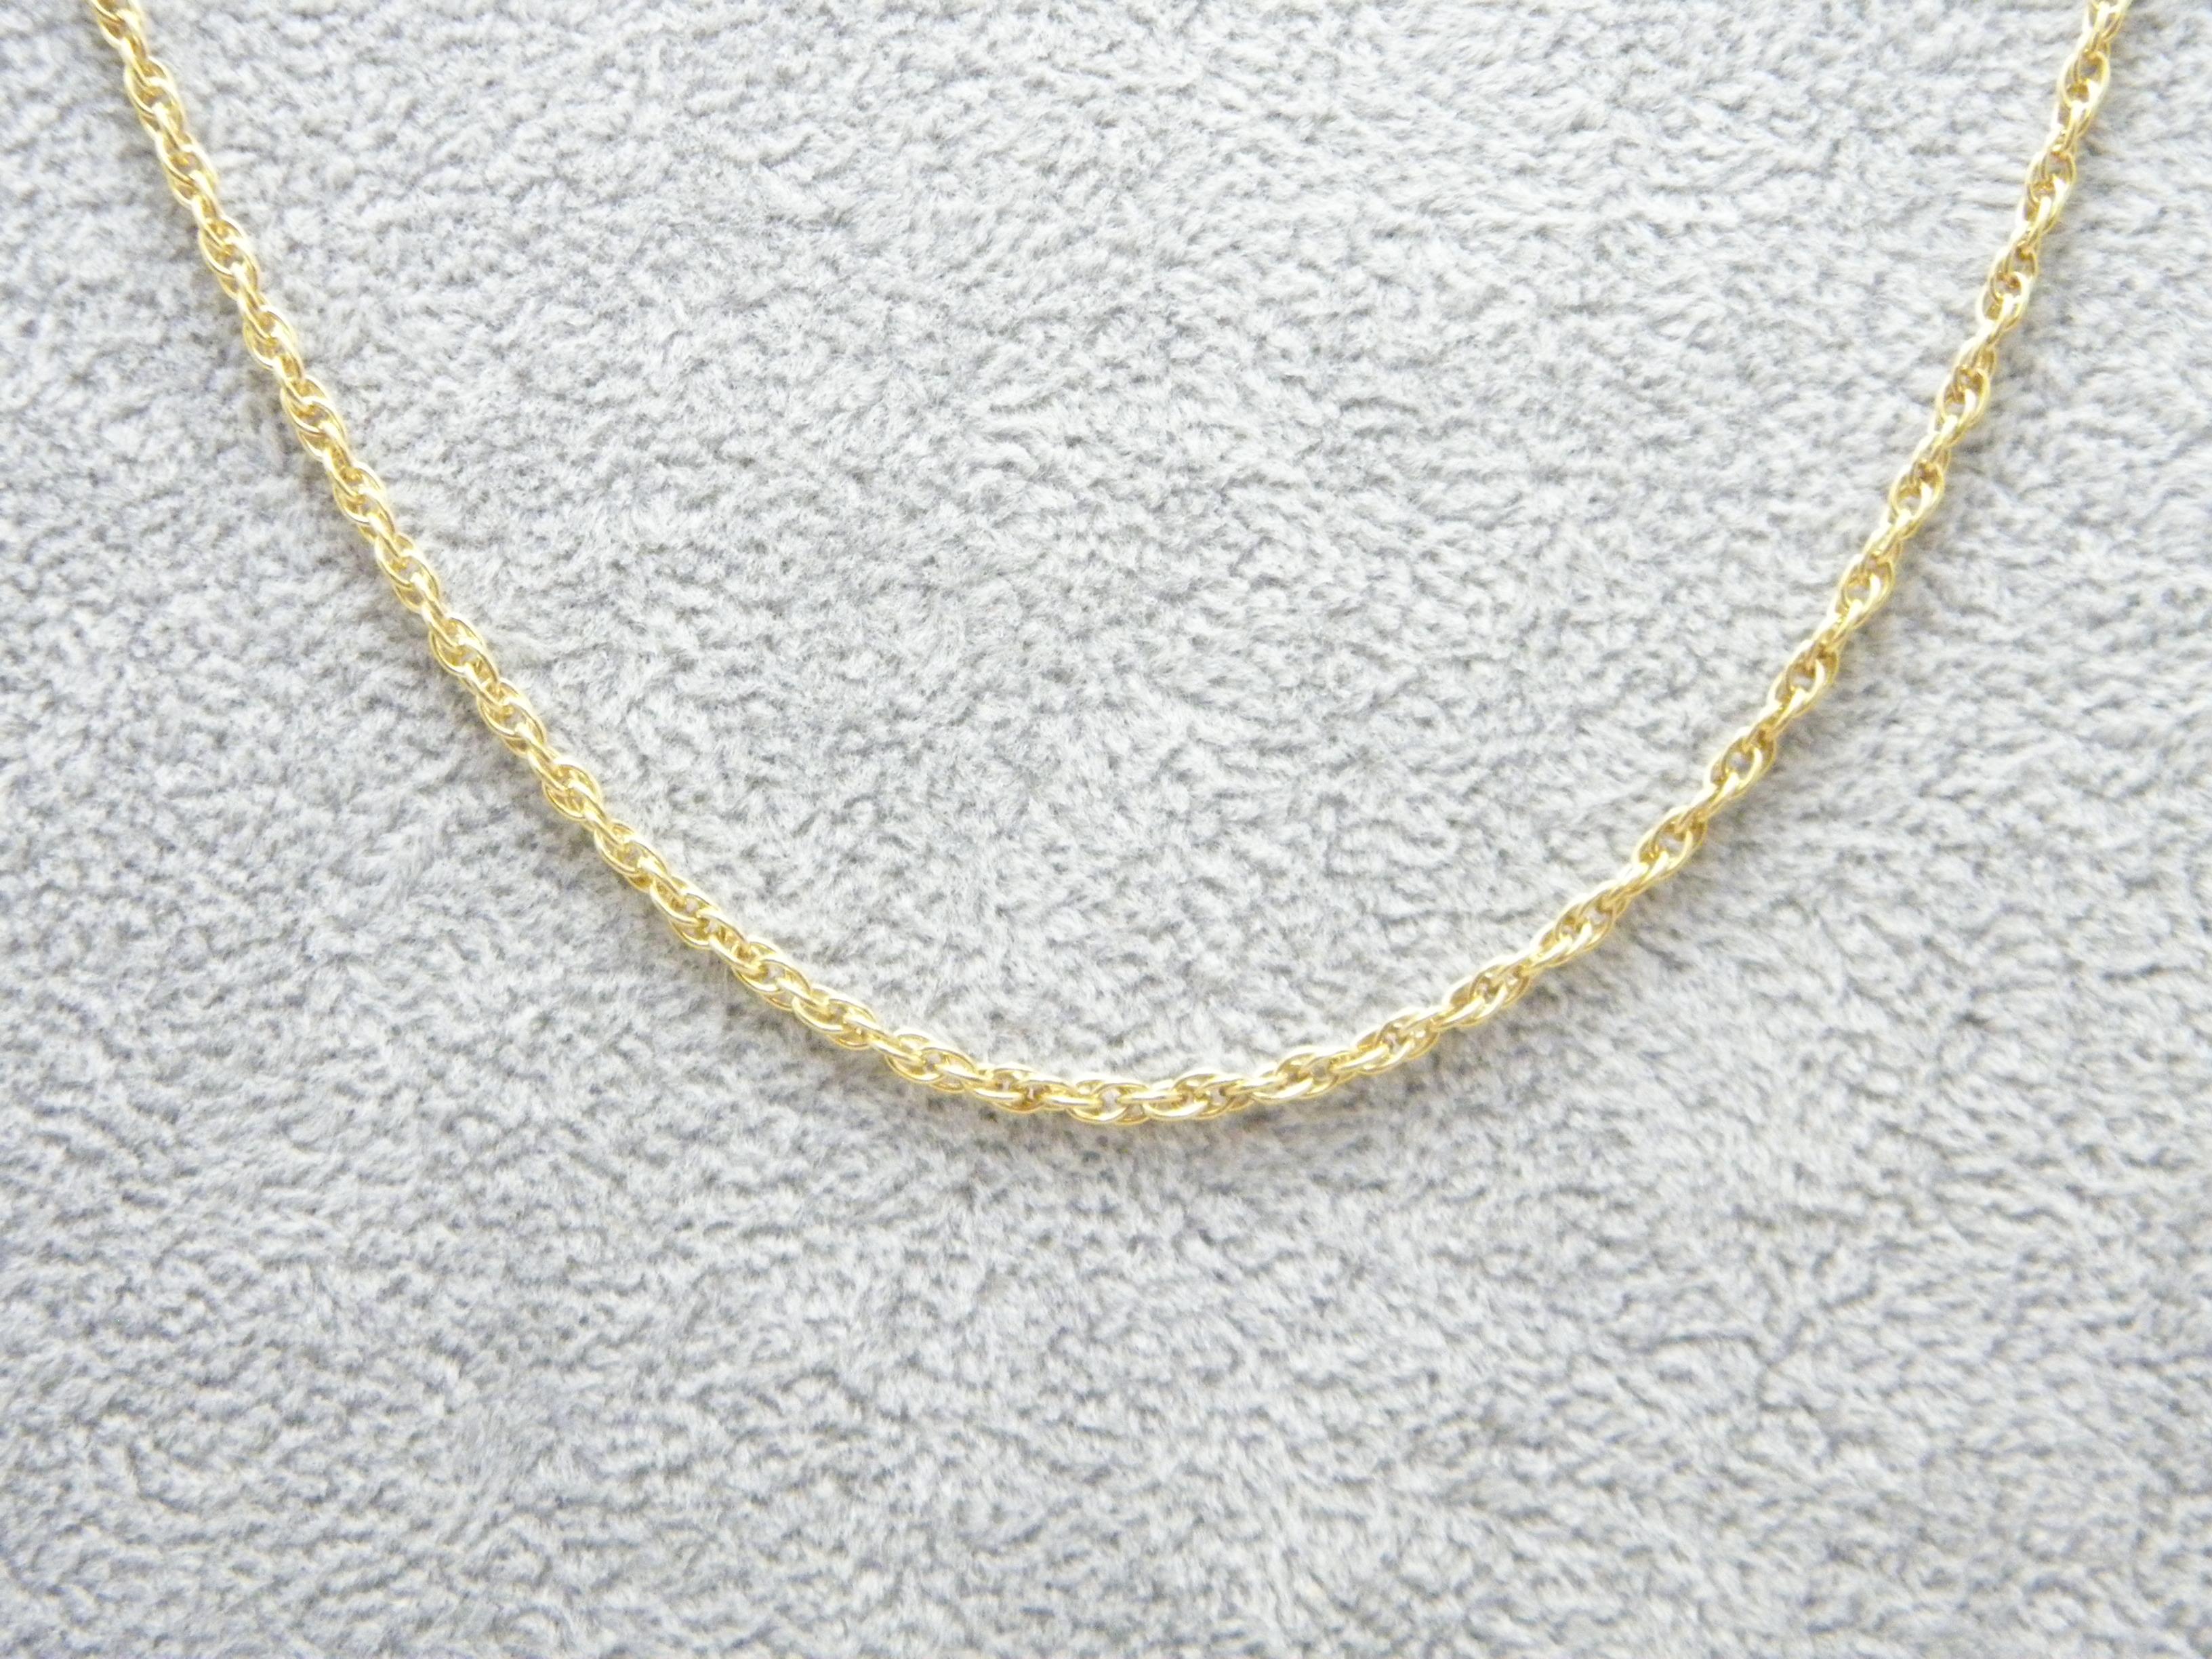 If you have landed on this page then you have an eye for beauty.

On offer is this gorgeous

VINTAGE 9CT GOLD 19 INCH PRINCE OF WALES ROPE NECKLACE

CHAIN DESCRIPTION
Style: Prince of Wales twist rope design.  Nice and sturdy so ideal on its own or